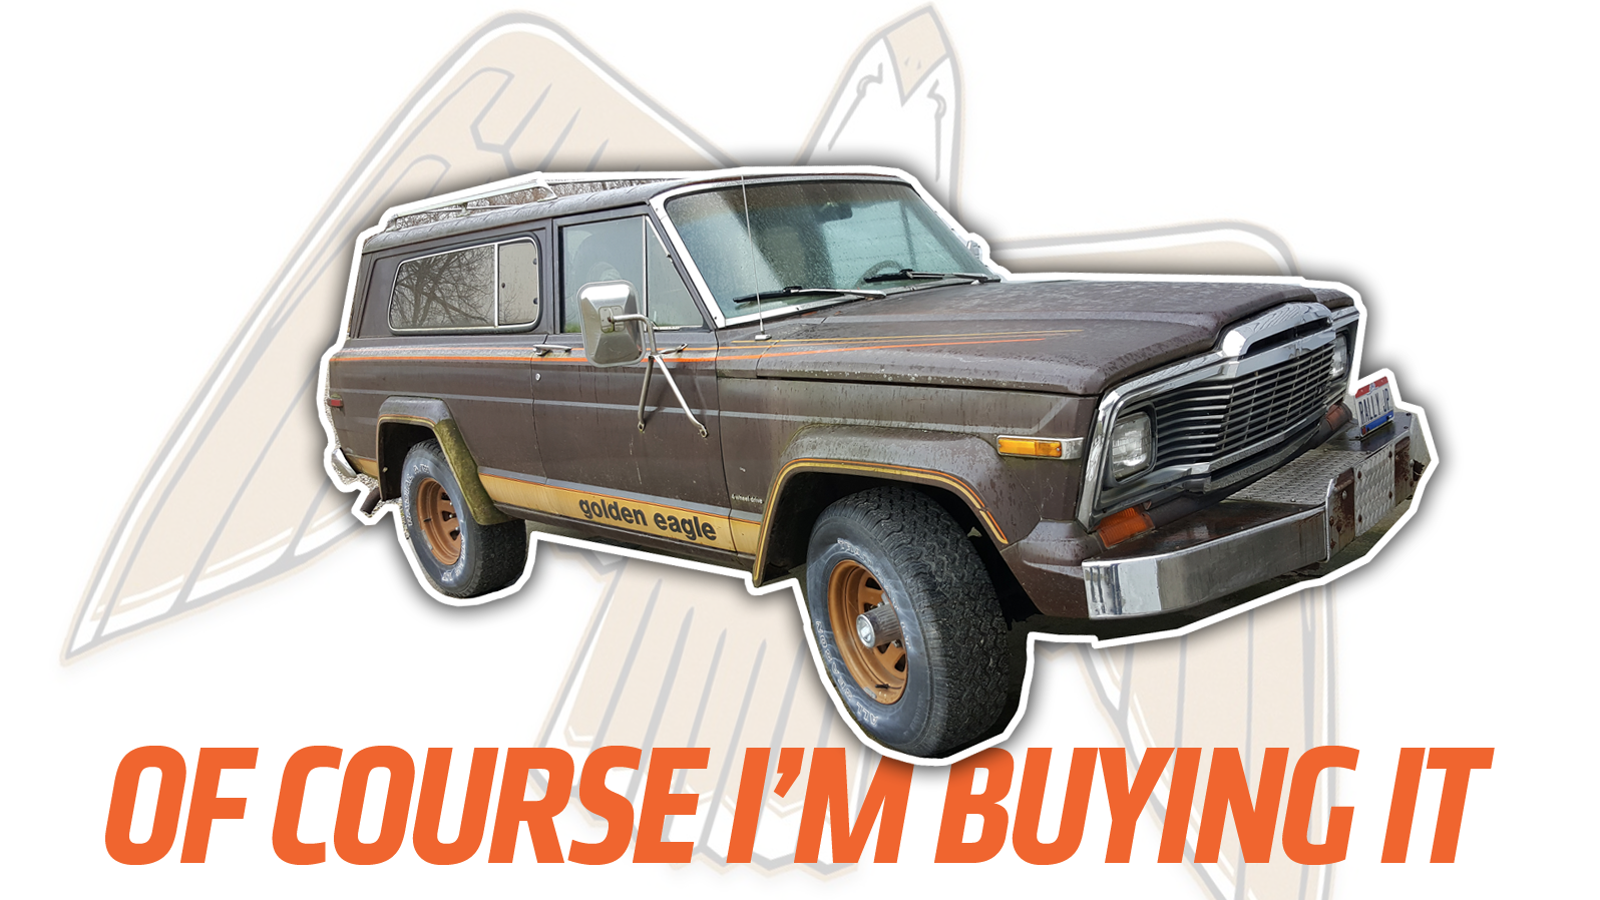 I'm Buying That 1979 Jeep Cherokee Golden Eagle Because It's Freaking Amazing